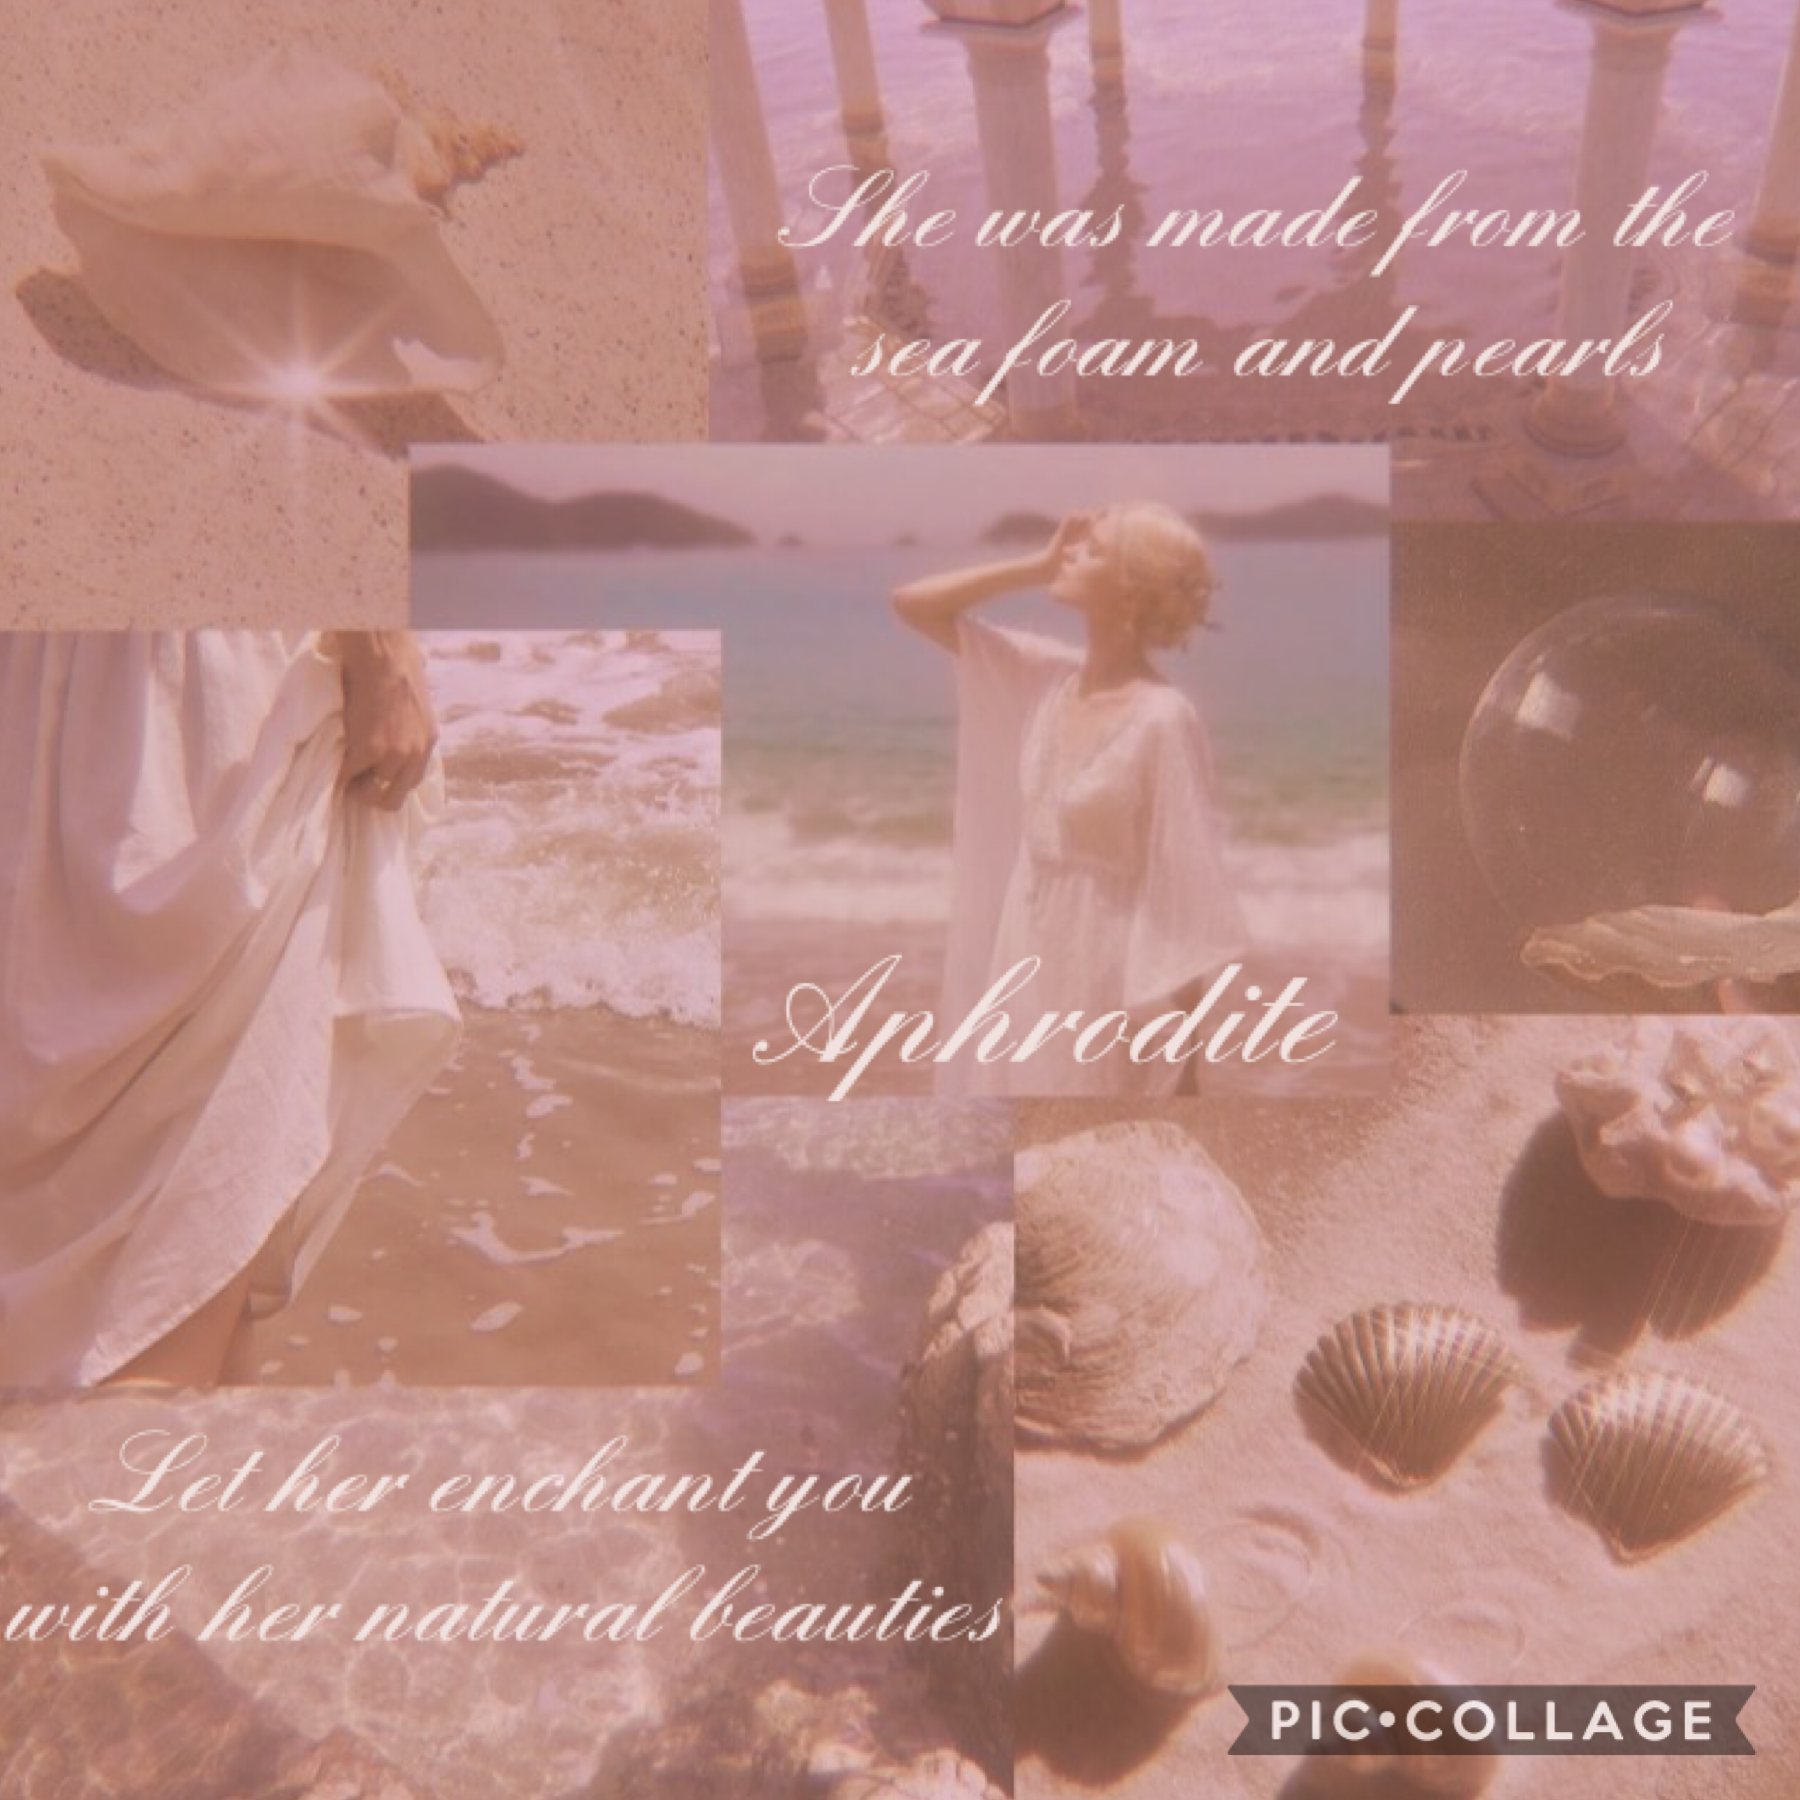 !!!🌸Greek mythology series🐚!!!
First up{Aphrodite}
🌊Made from sea-foam an stuff 🌊 😂
Next up you guess 🐍